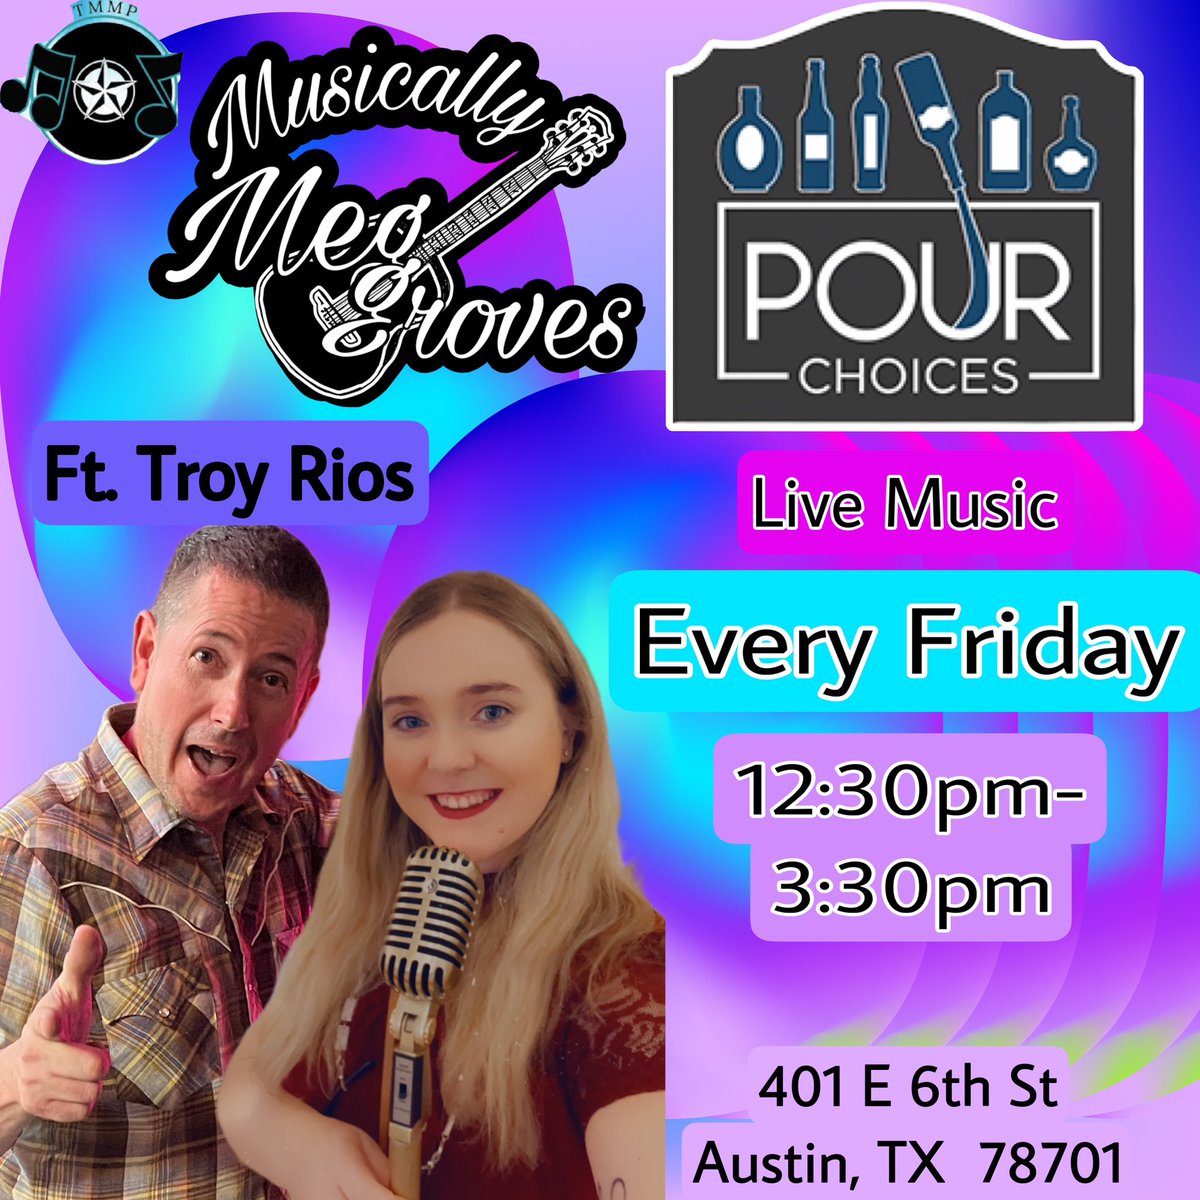 We are back at Pour Choices TODAY Friday June 30th from 12:30pm-3:30pm.

401 E 6th St
Austin, TX  78701

#livemusic #live #austintexas #austintx #liveperformance #6thstreet #downtown #downtownaustin #musician #music #duo #cover #originalmusic #TMMP #atx #atxmusicscene